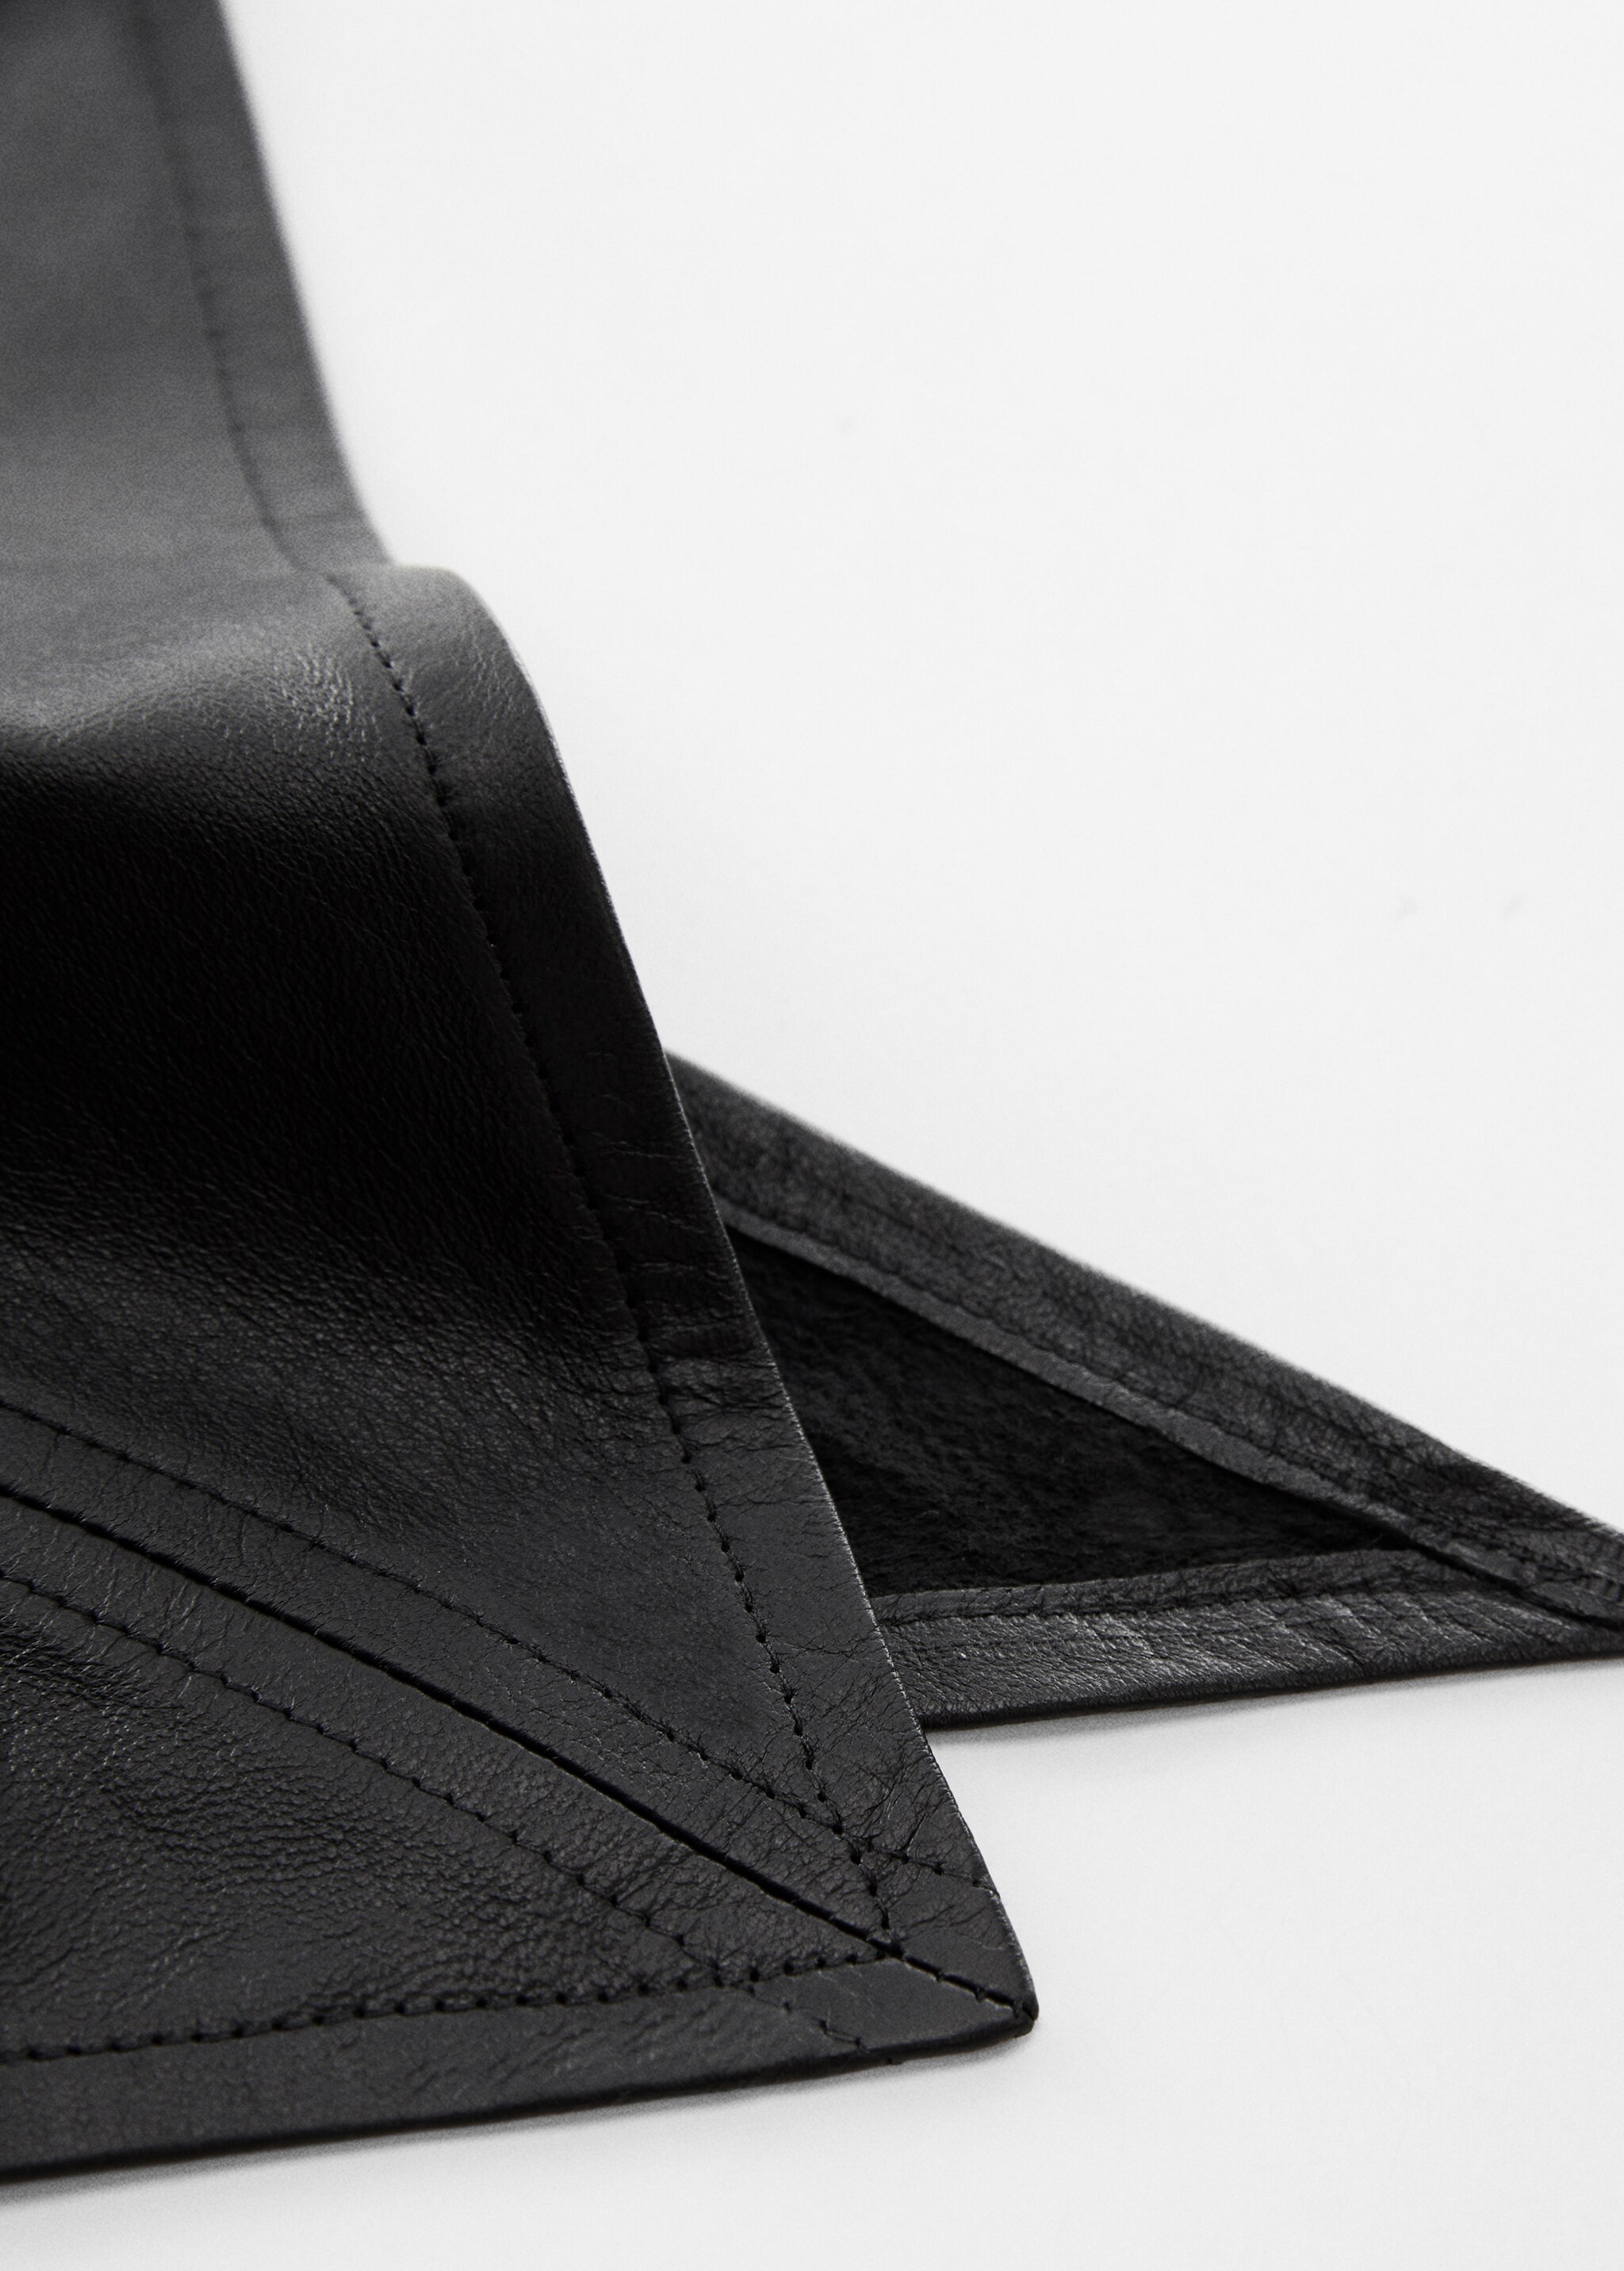 100% leather handkerchief - Details of the article 1